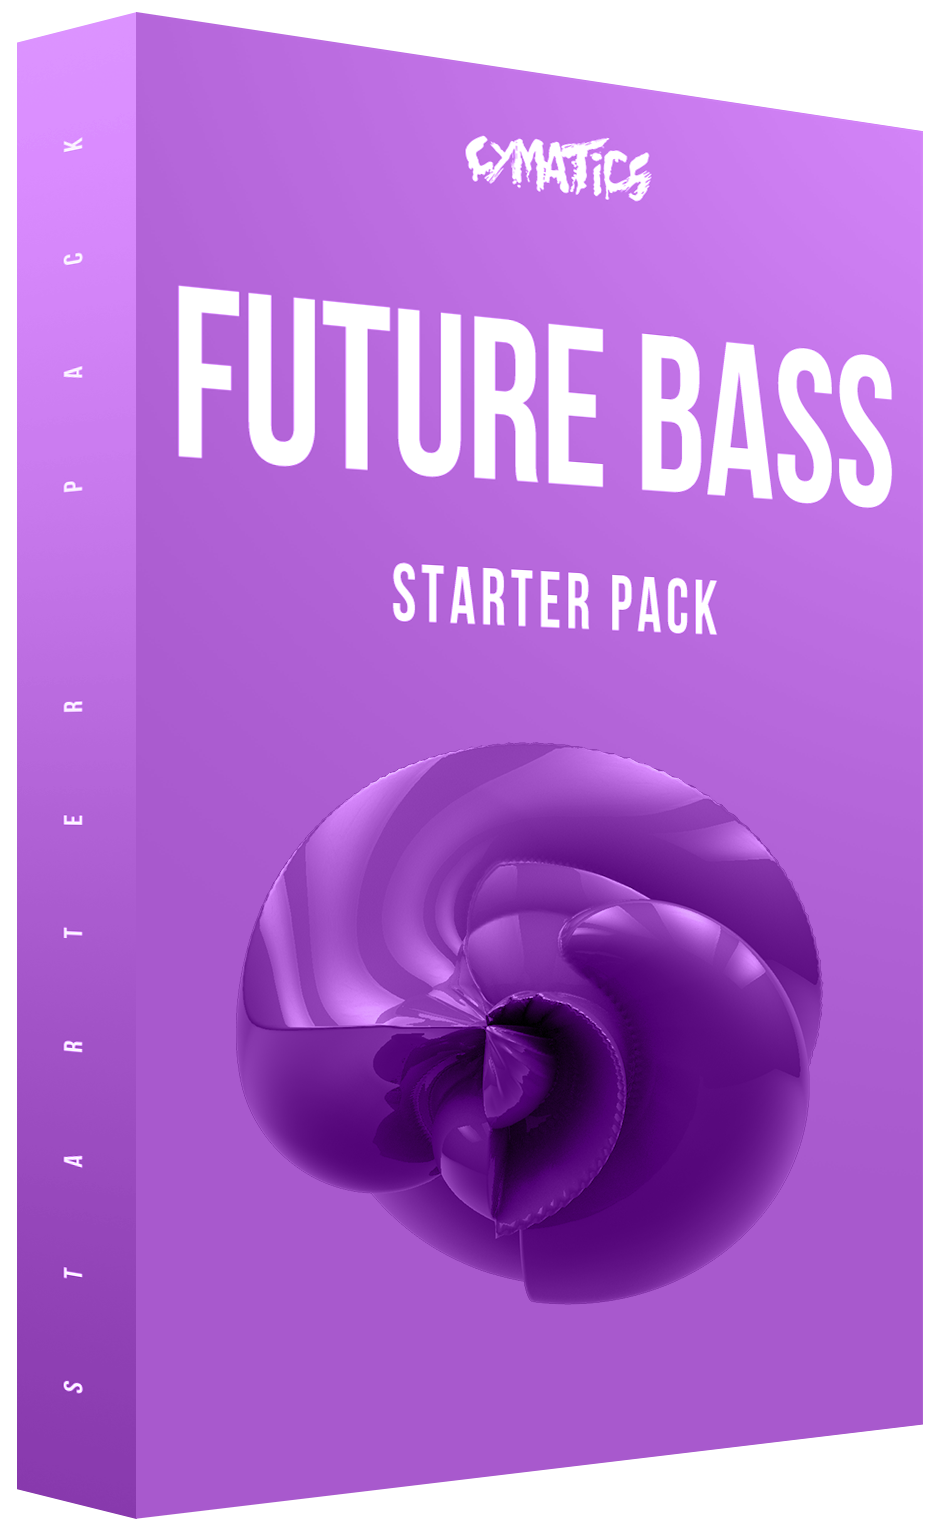 Free Bass Loops Samples & Sounds